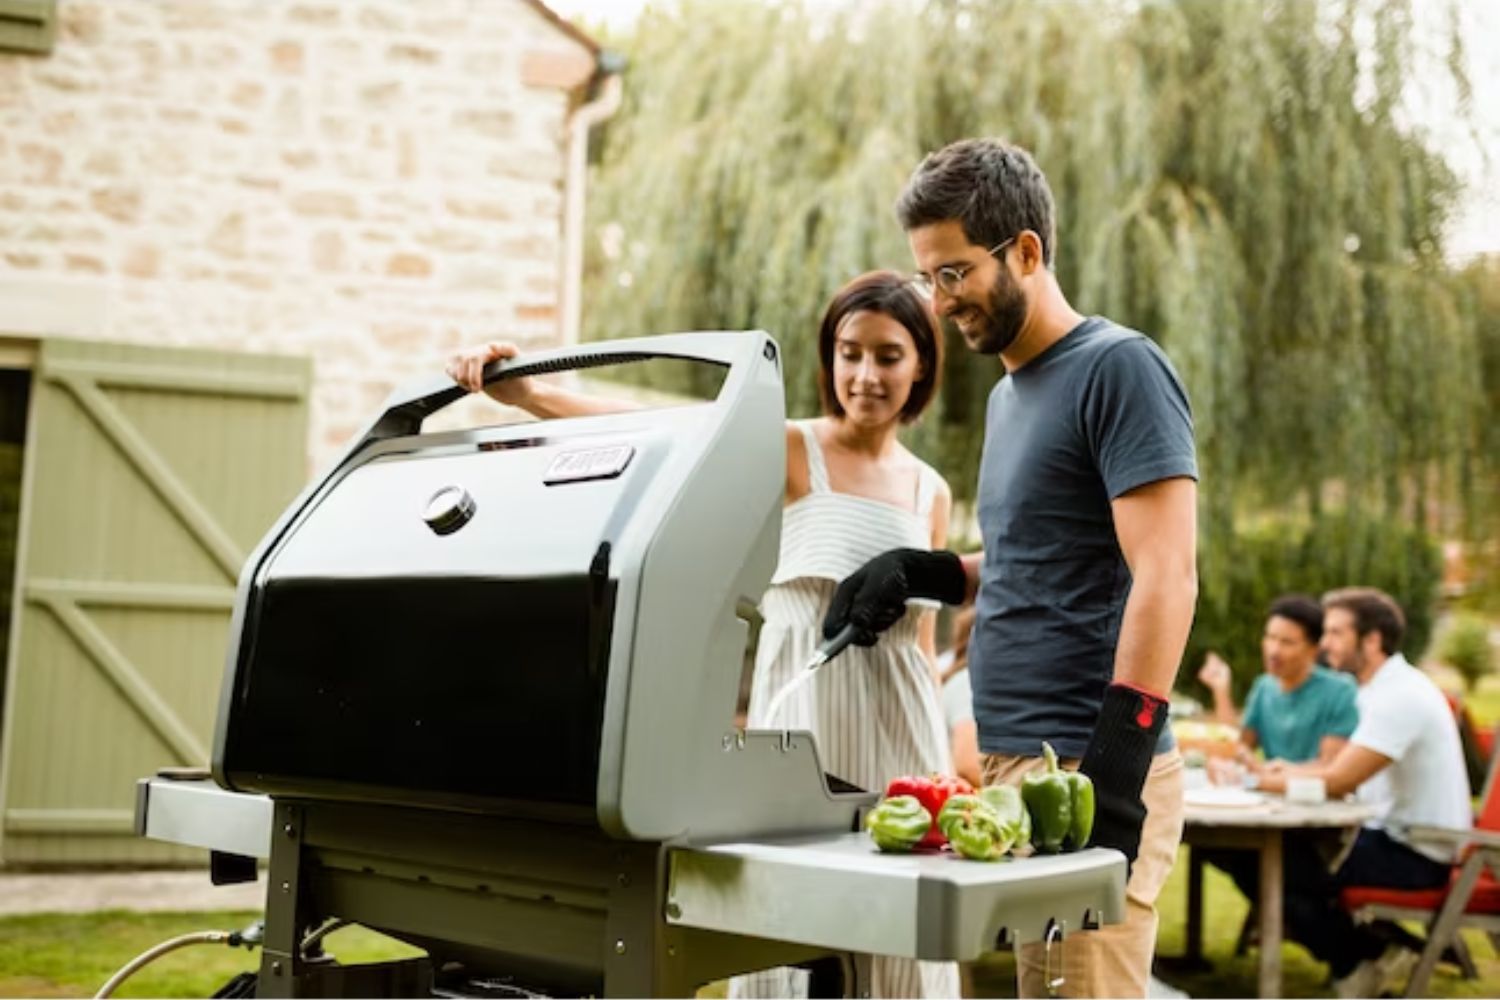 The Best Outdoor Accessories to Shop from Lowe’s Options: Weber Spirit II E-310 Black 3-Burner Liquid Propane Gas Grill